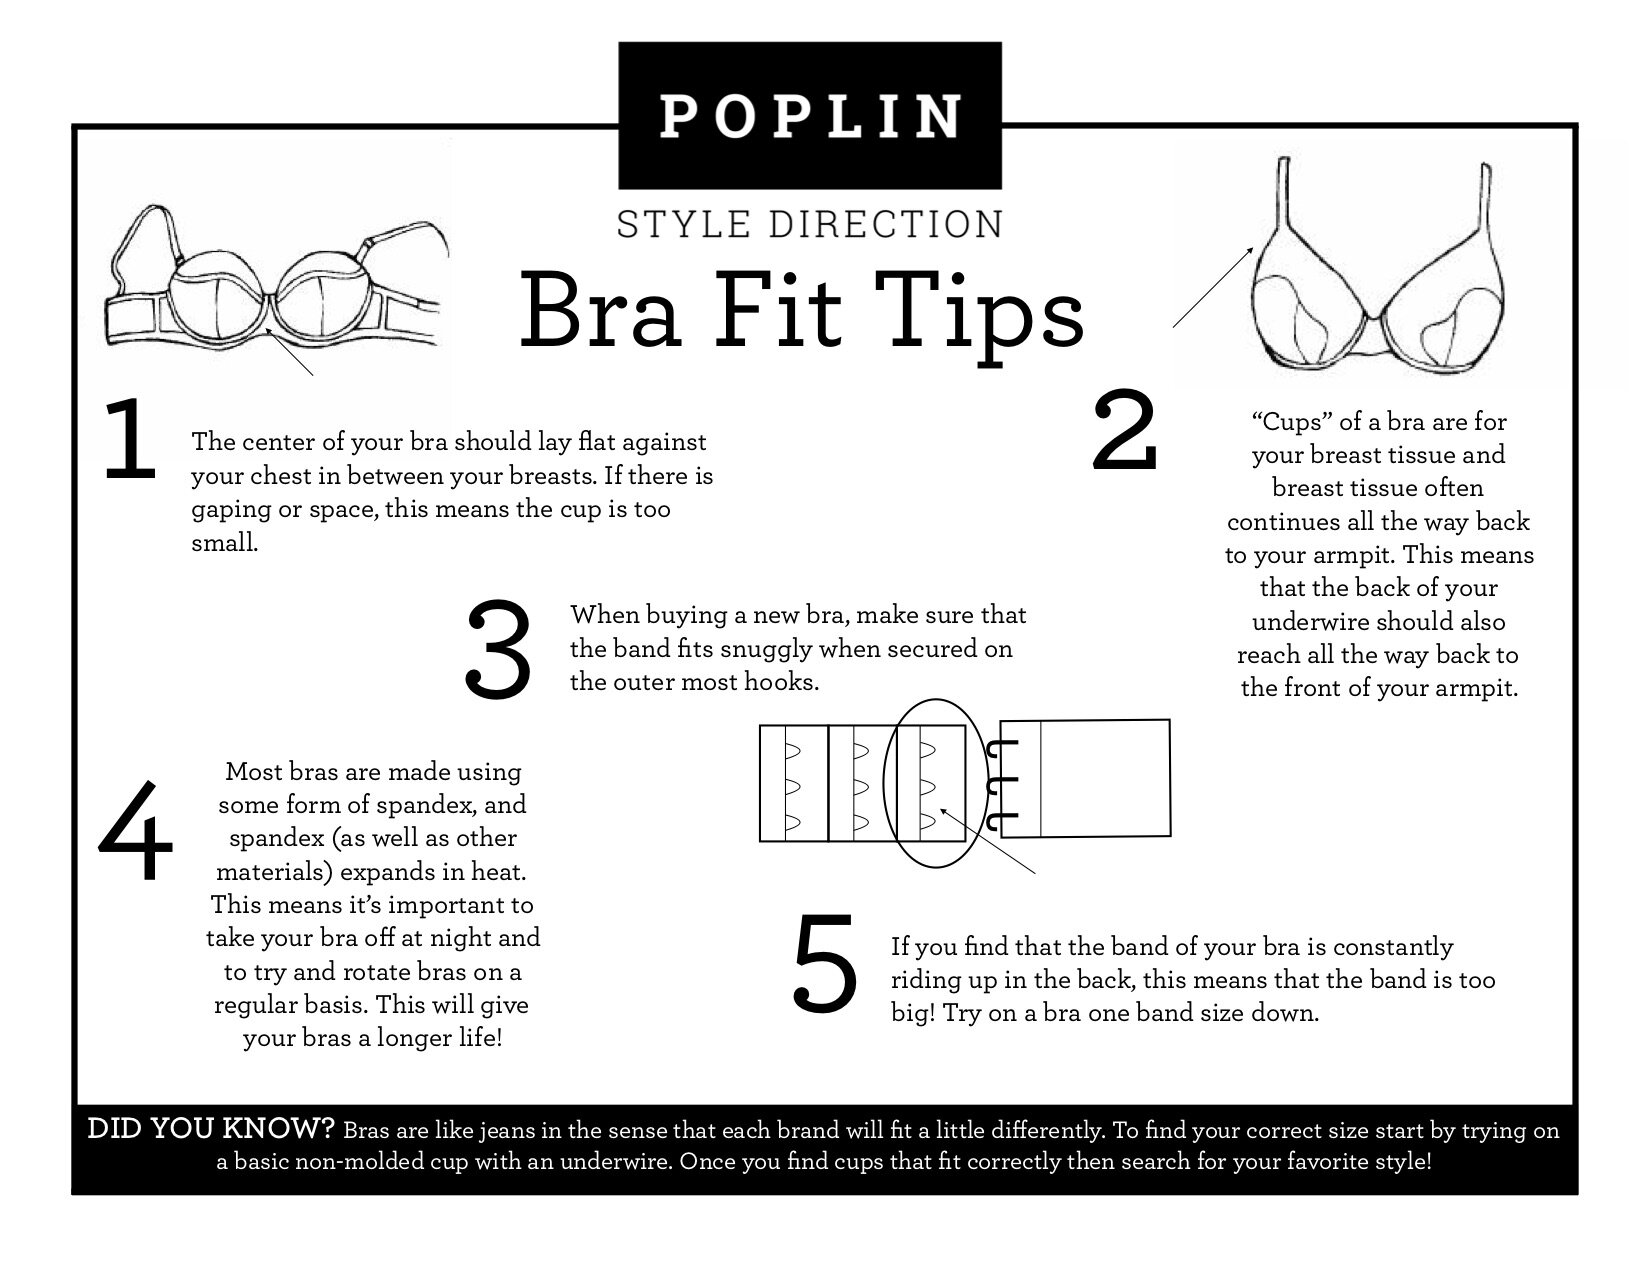 Styling tips: Wear The Right Bra